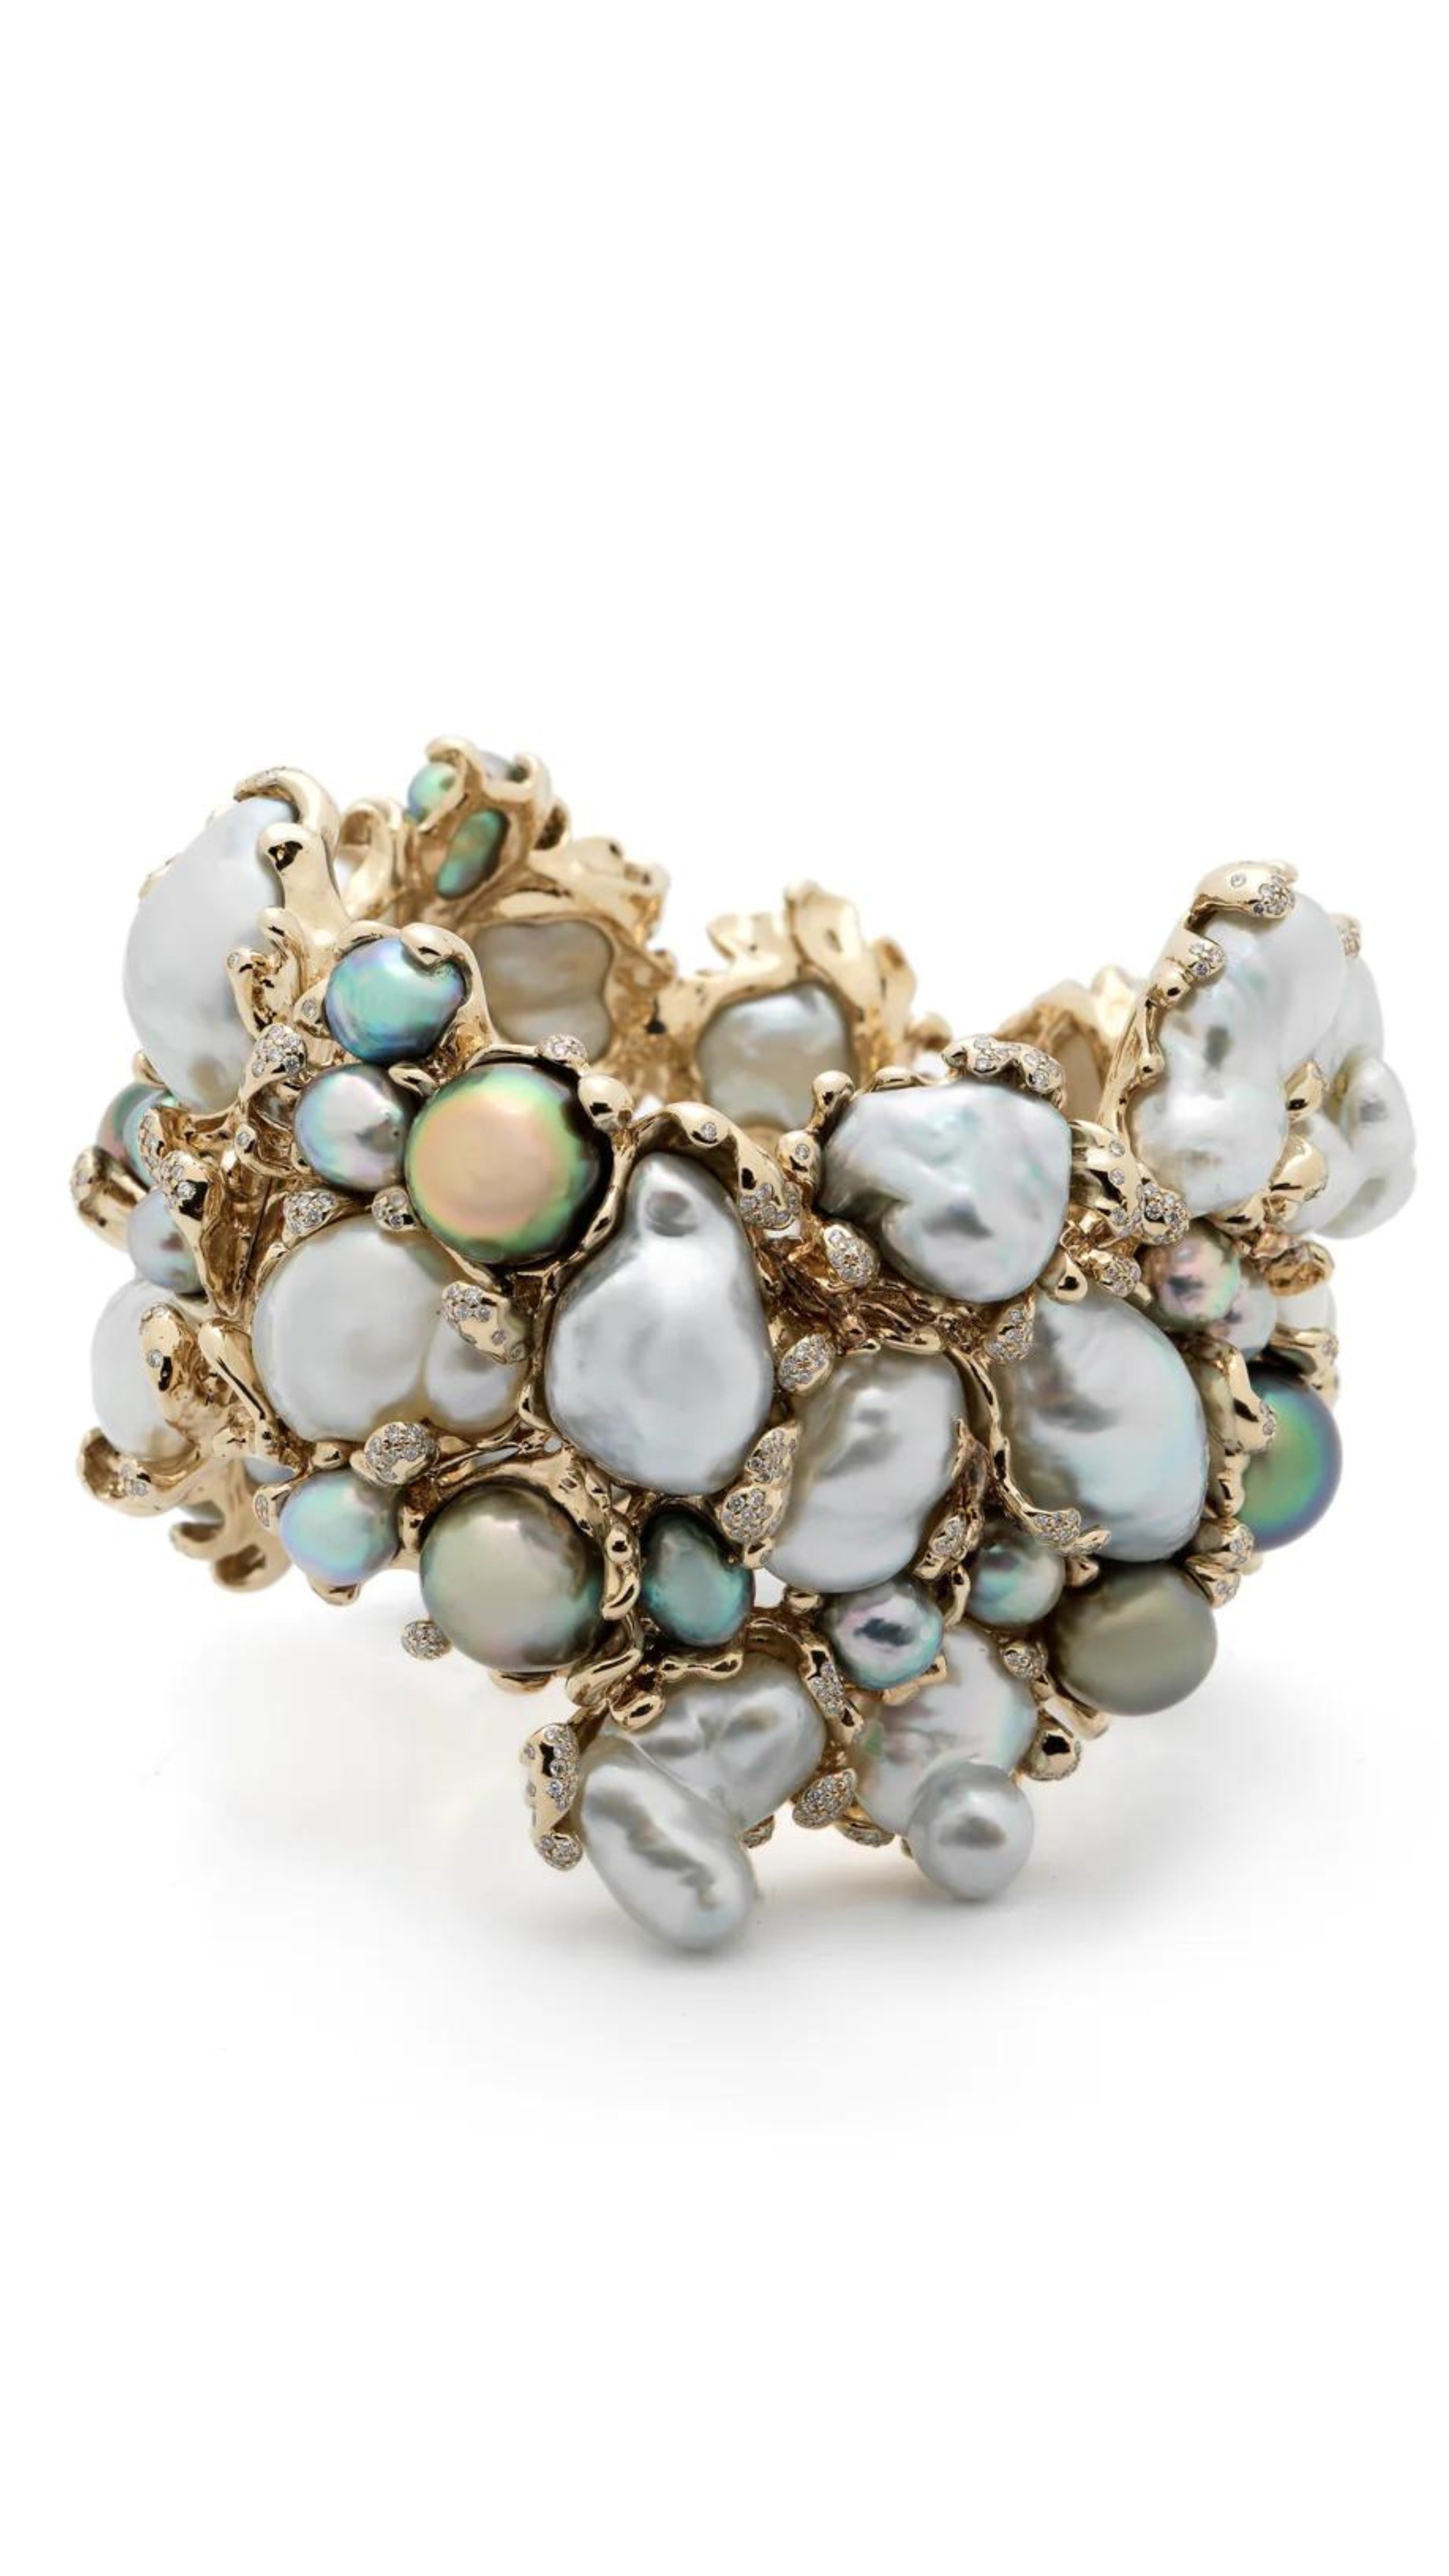 Bibi van der Velden Rock Pool Bracelet. A large cuff bracelet in 18k white gold and a dazzling cluster of Keshi pearls to create an organic shape with beautiful iridescent tones of blue, white, and grey pearls. The bracelet is further adorned with white diamonds.